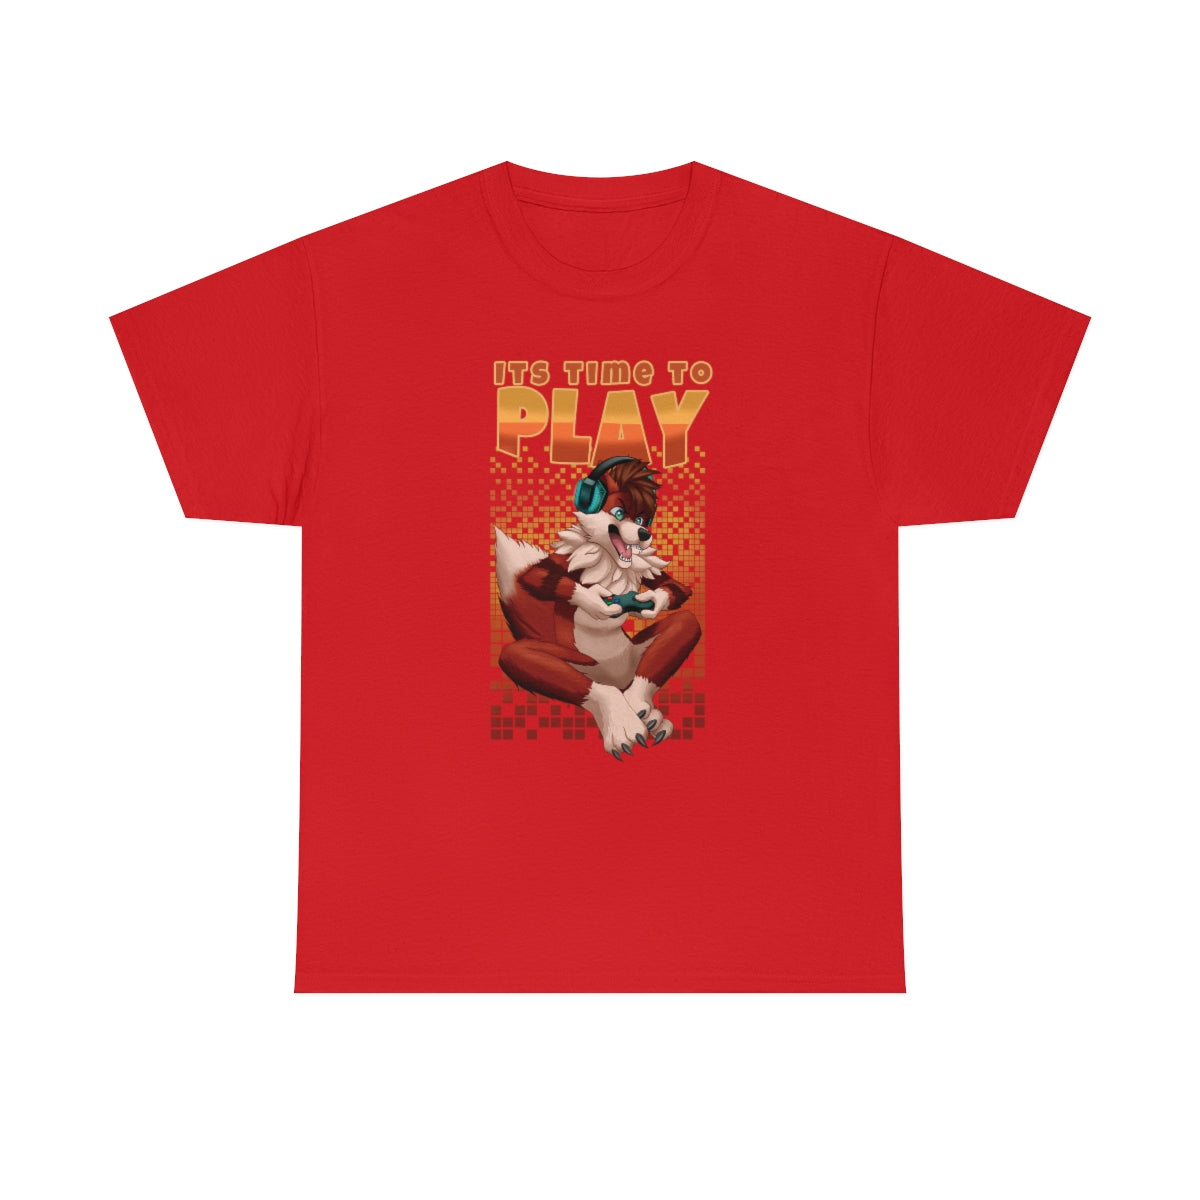 Its Time to Play - T-Shirt T-Shirt Artworktee Red S 